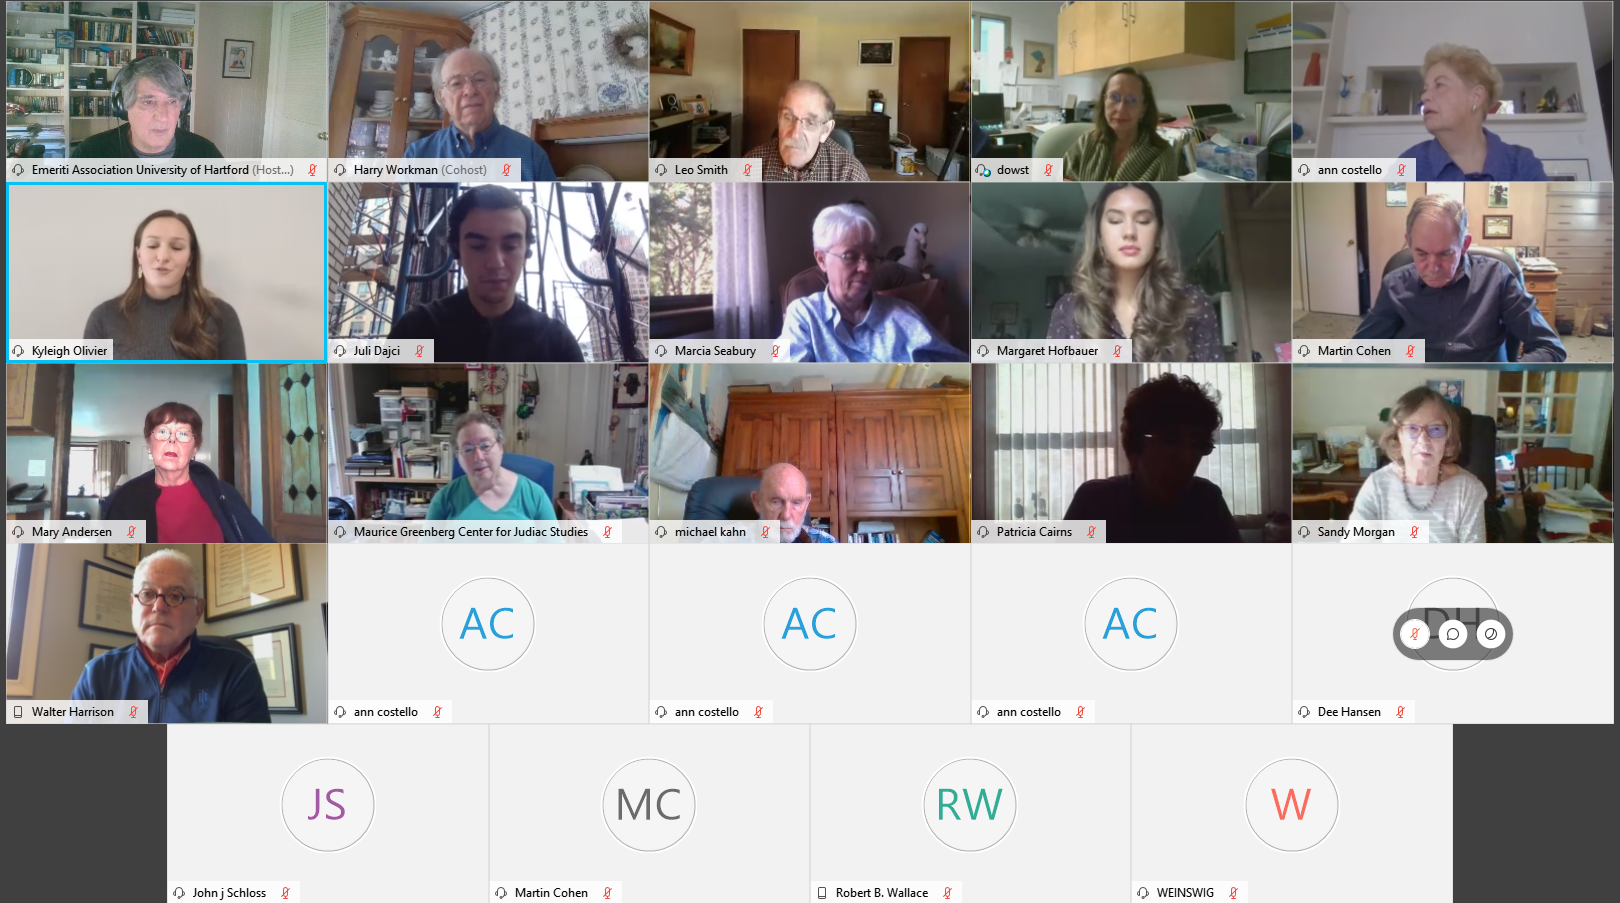 The Emeriti Association Fall Plenary Meeting was held on Thursday, October 22, 2020, via WebEx.  There were 26 participants (as shown on the WebEx screen at one point).  Guests included:  Randi Ashton-Pritting and Sean Parke.